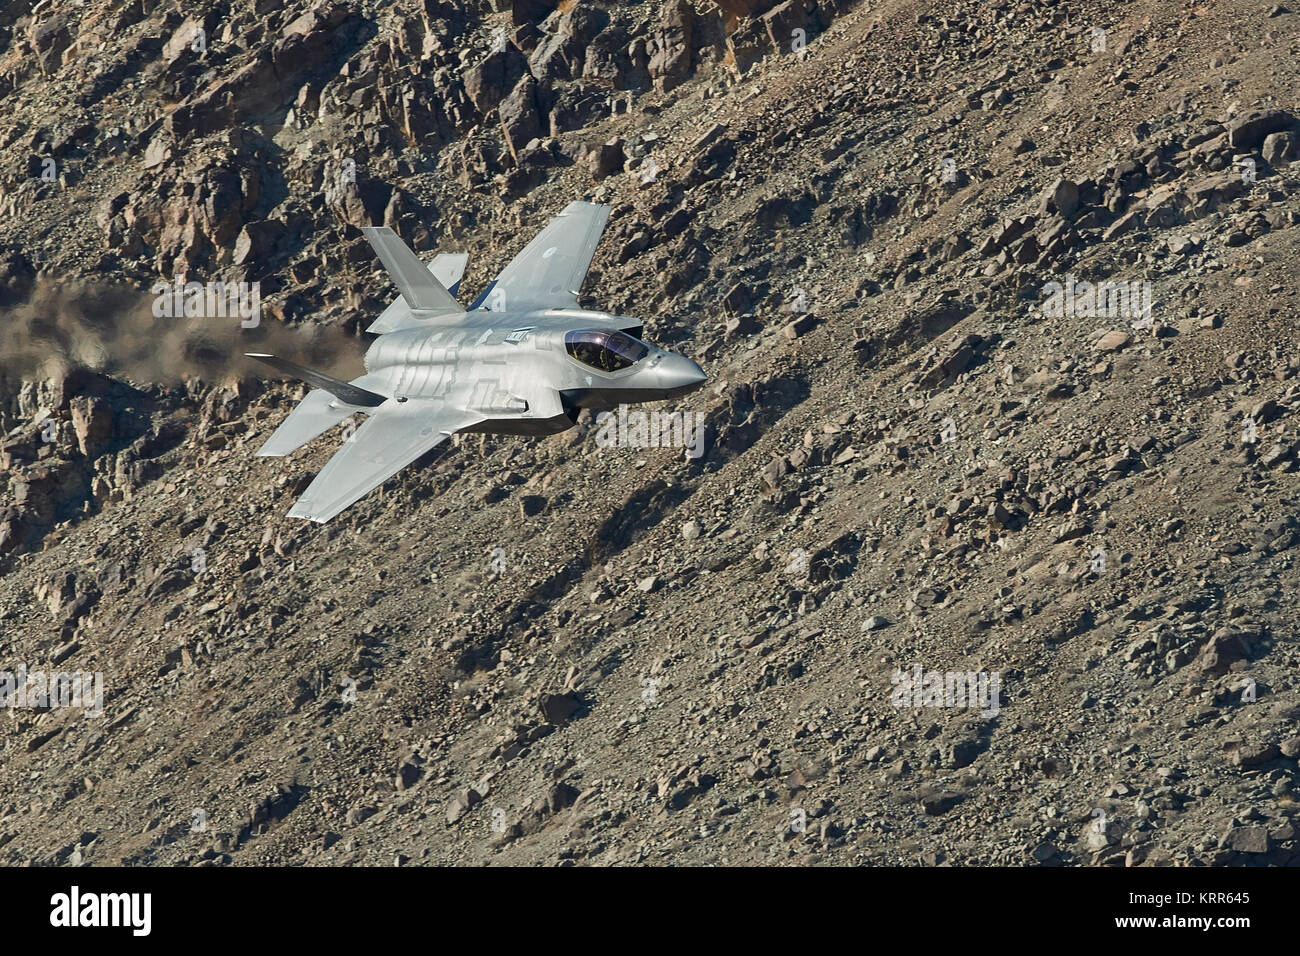 Lockheed Martin F-35 Lightning II Joint Strike Fighter (Stealth Fighter), Flying At Low Level Over The Mojave Desert In California, USA. Stock Photo